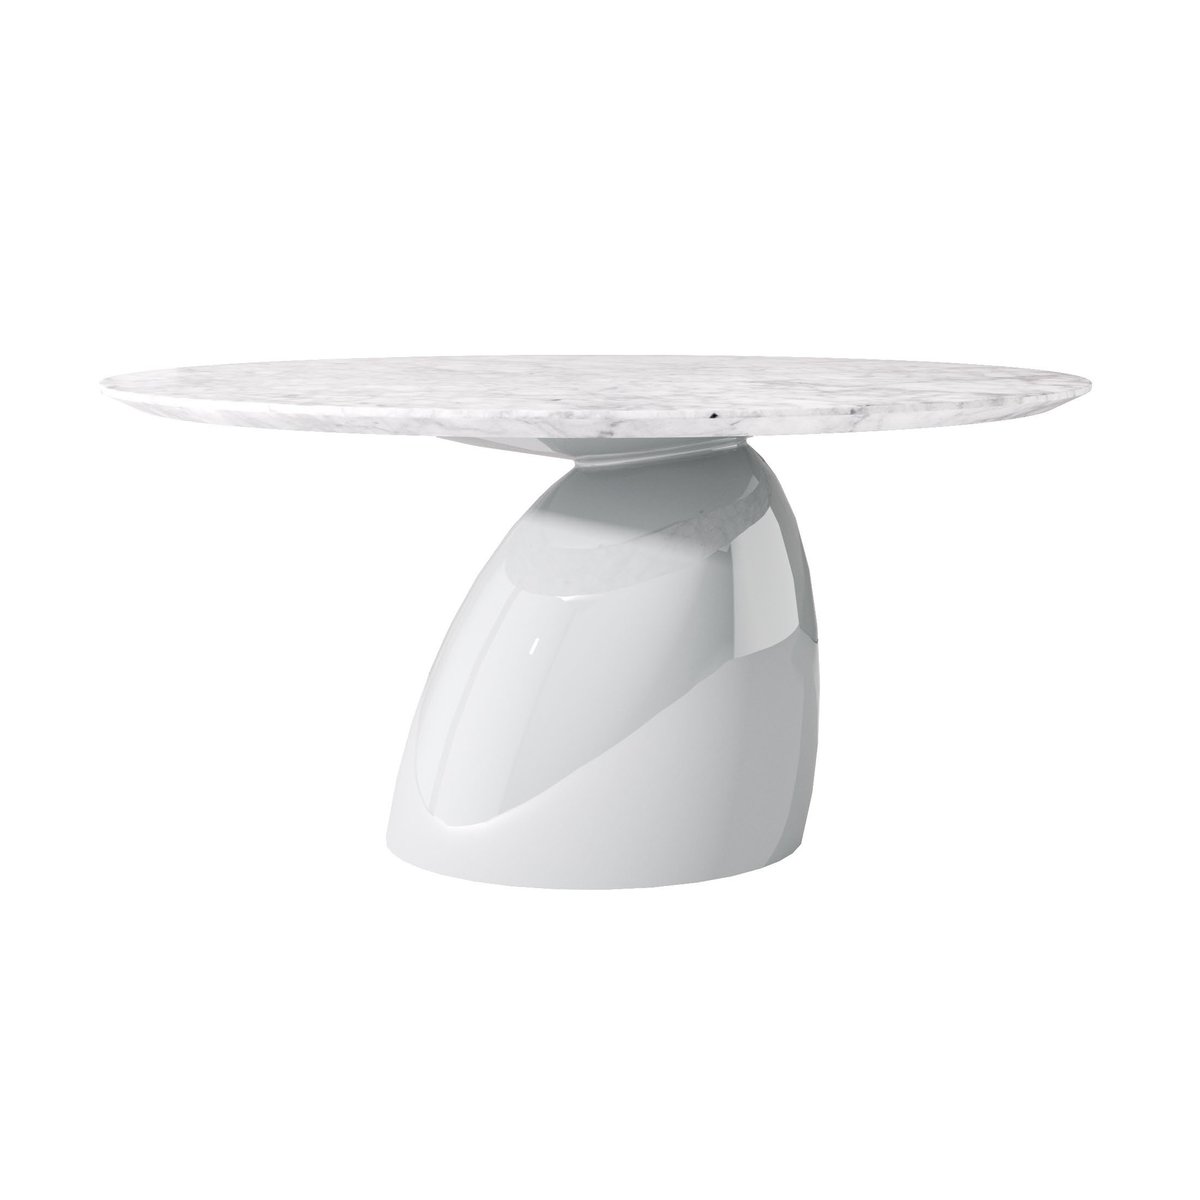 Marked on the foot with a label. Organically designed construction with base and top in glossy white lacquered plastic reinforced with fiberglass.

#furniture #home #livingroom #decoration #diningroom #interiorarchitecture #design #diningtable